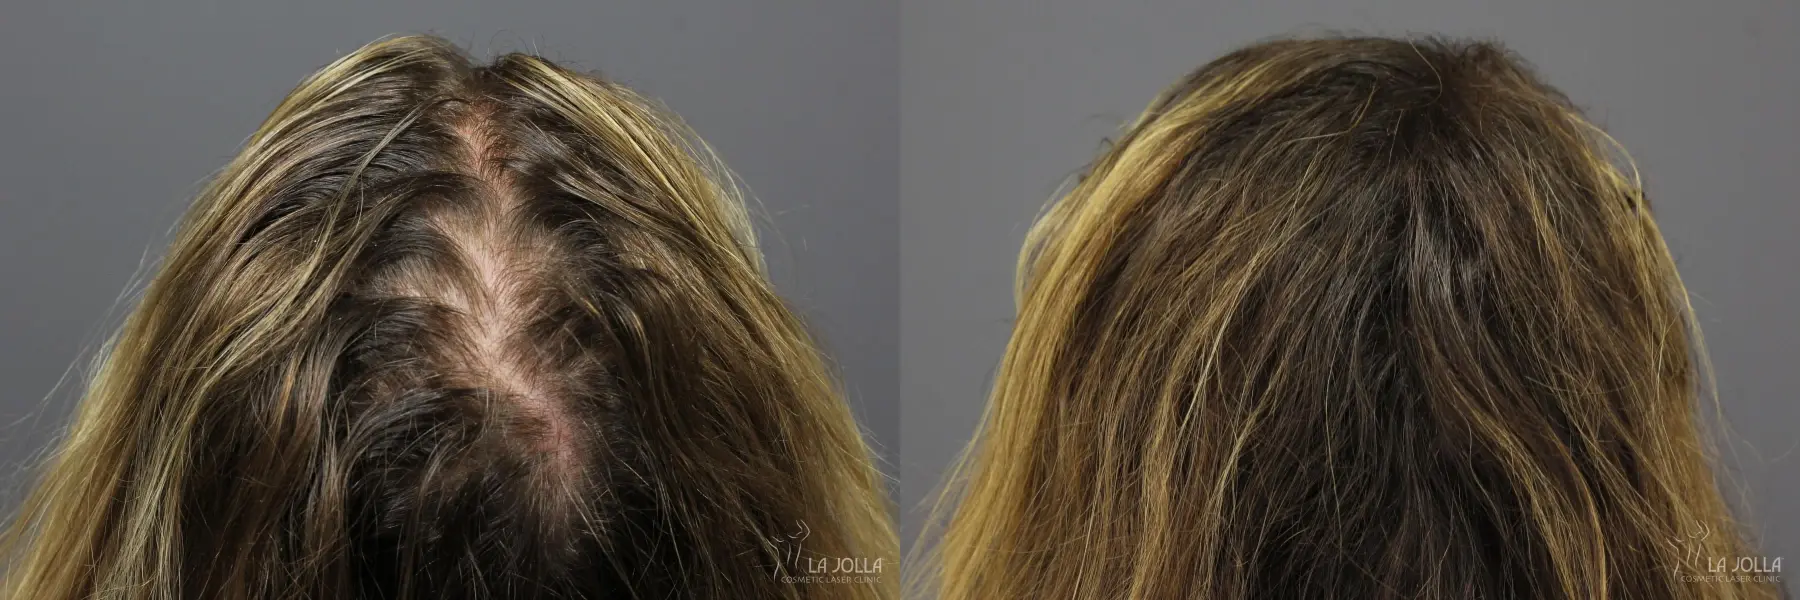 PRP (Platelet-Rich Plasma): Patient 3 - Before and After 4